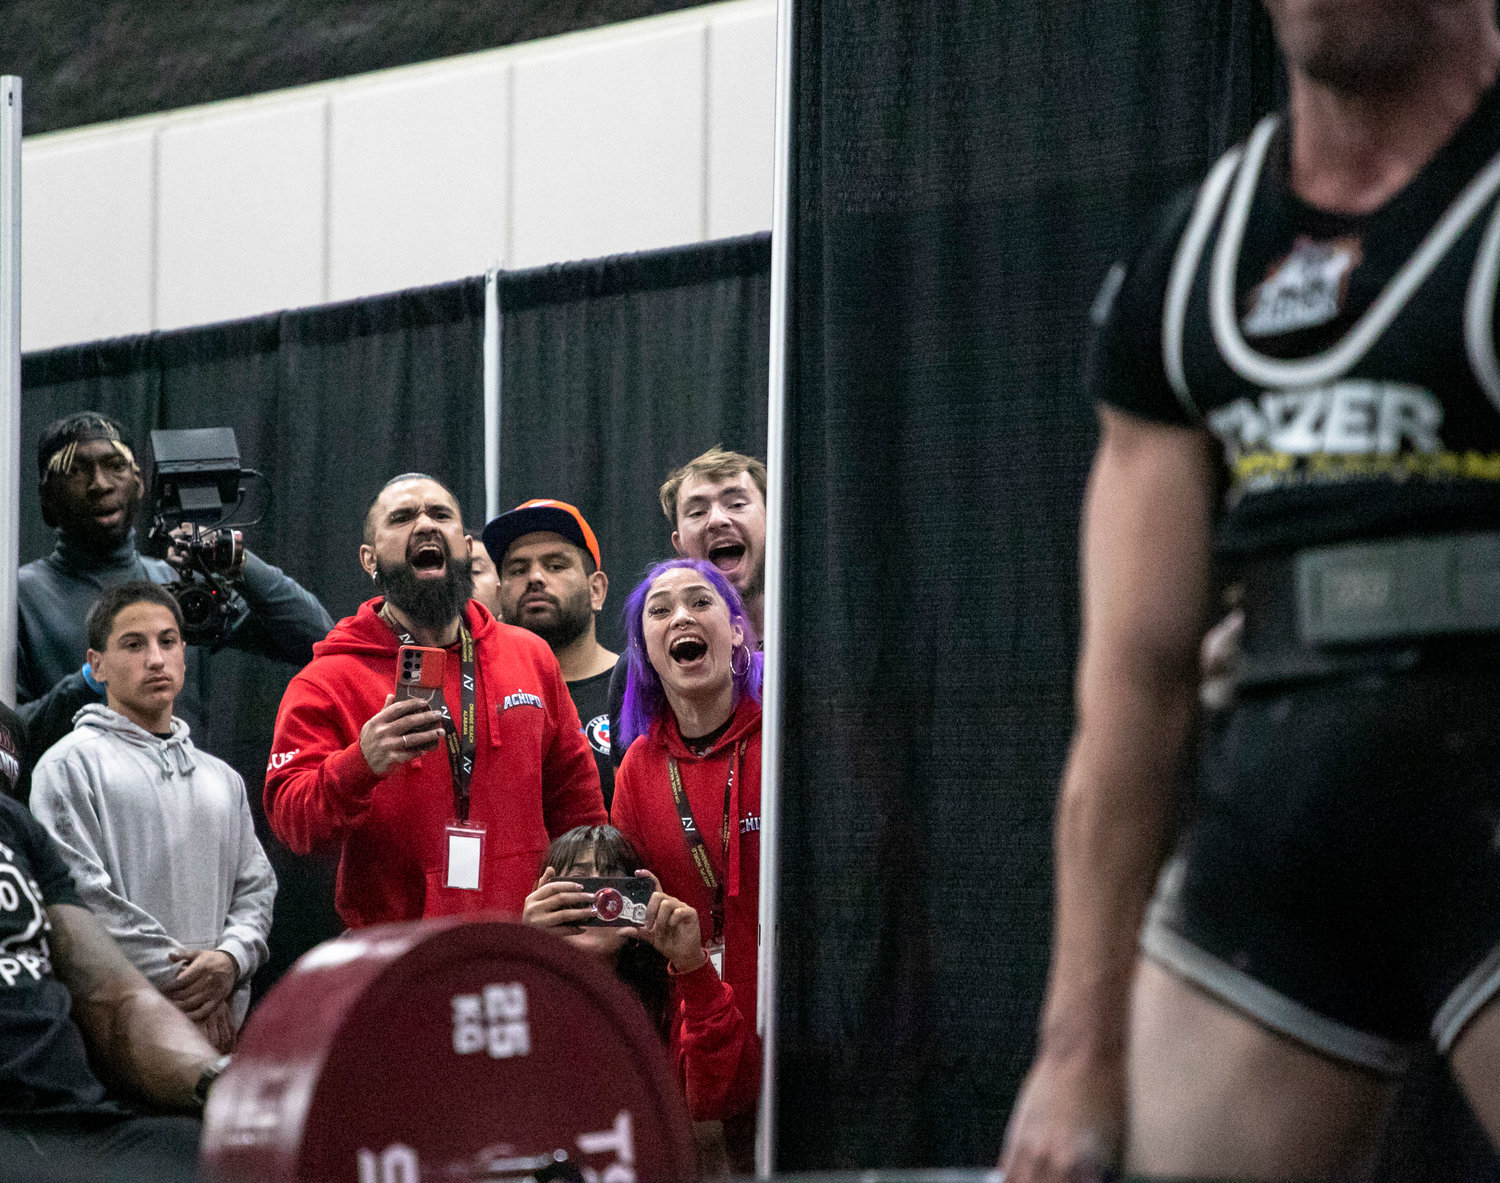 Chilean supporters cheer on Matais Quiñinano Peñ to a national record-setting deadlift of 518.1 pounds (235 kg) at the World Championship meet of the International Powerlifting League Oct. 20 at the Orange Beach Event Center.